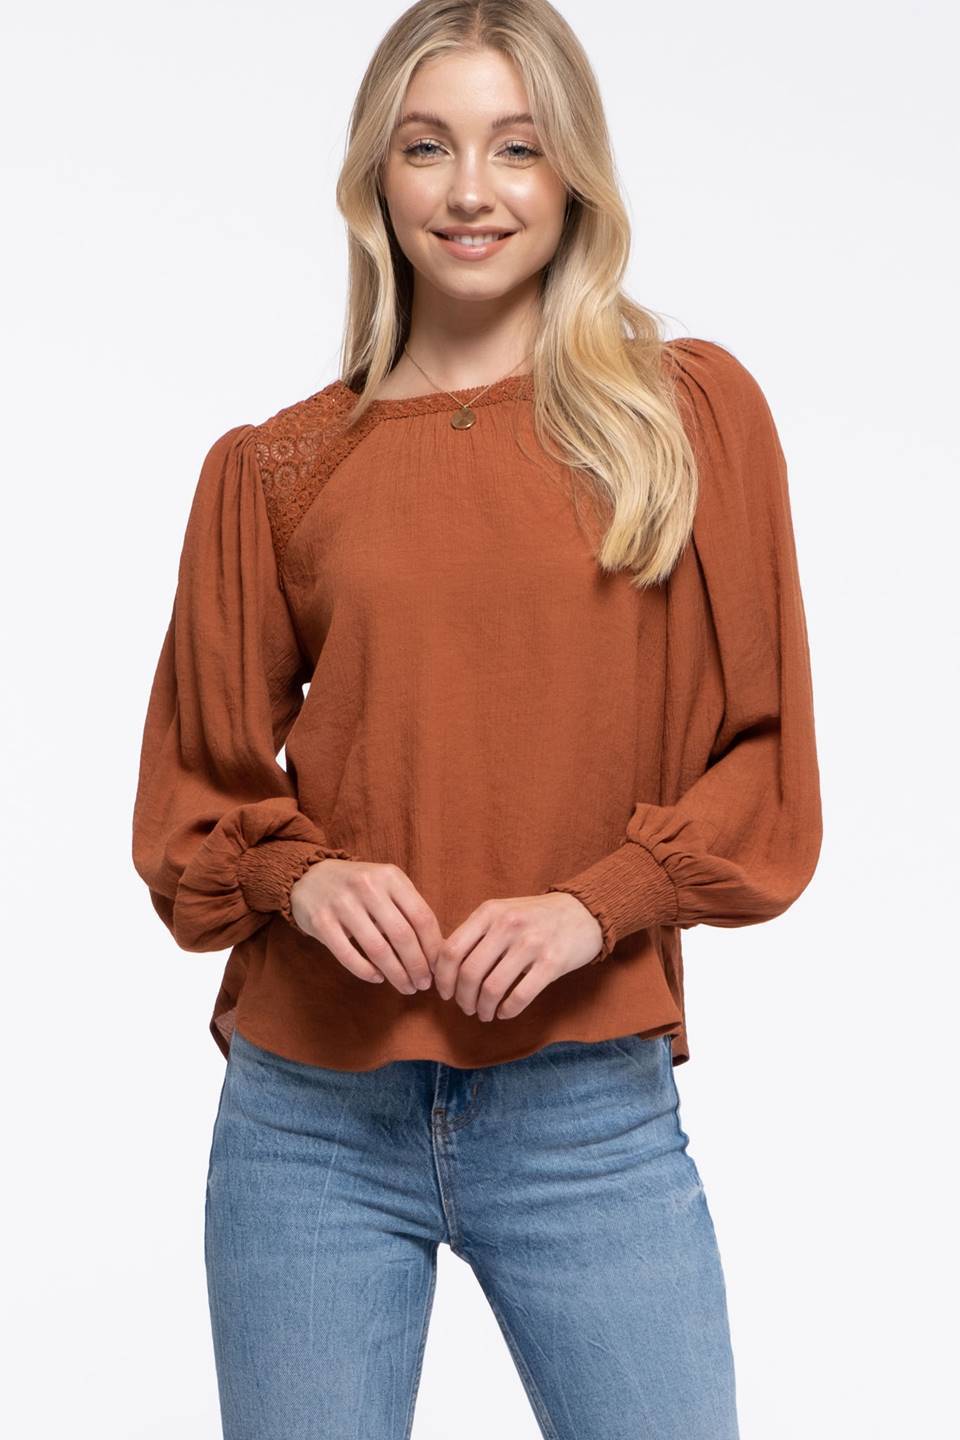 Lace Inset Peasant Top